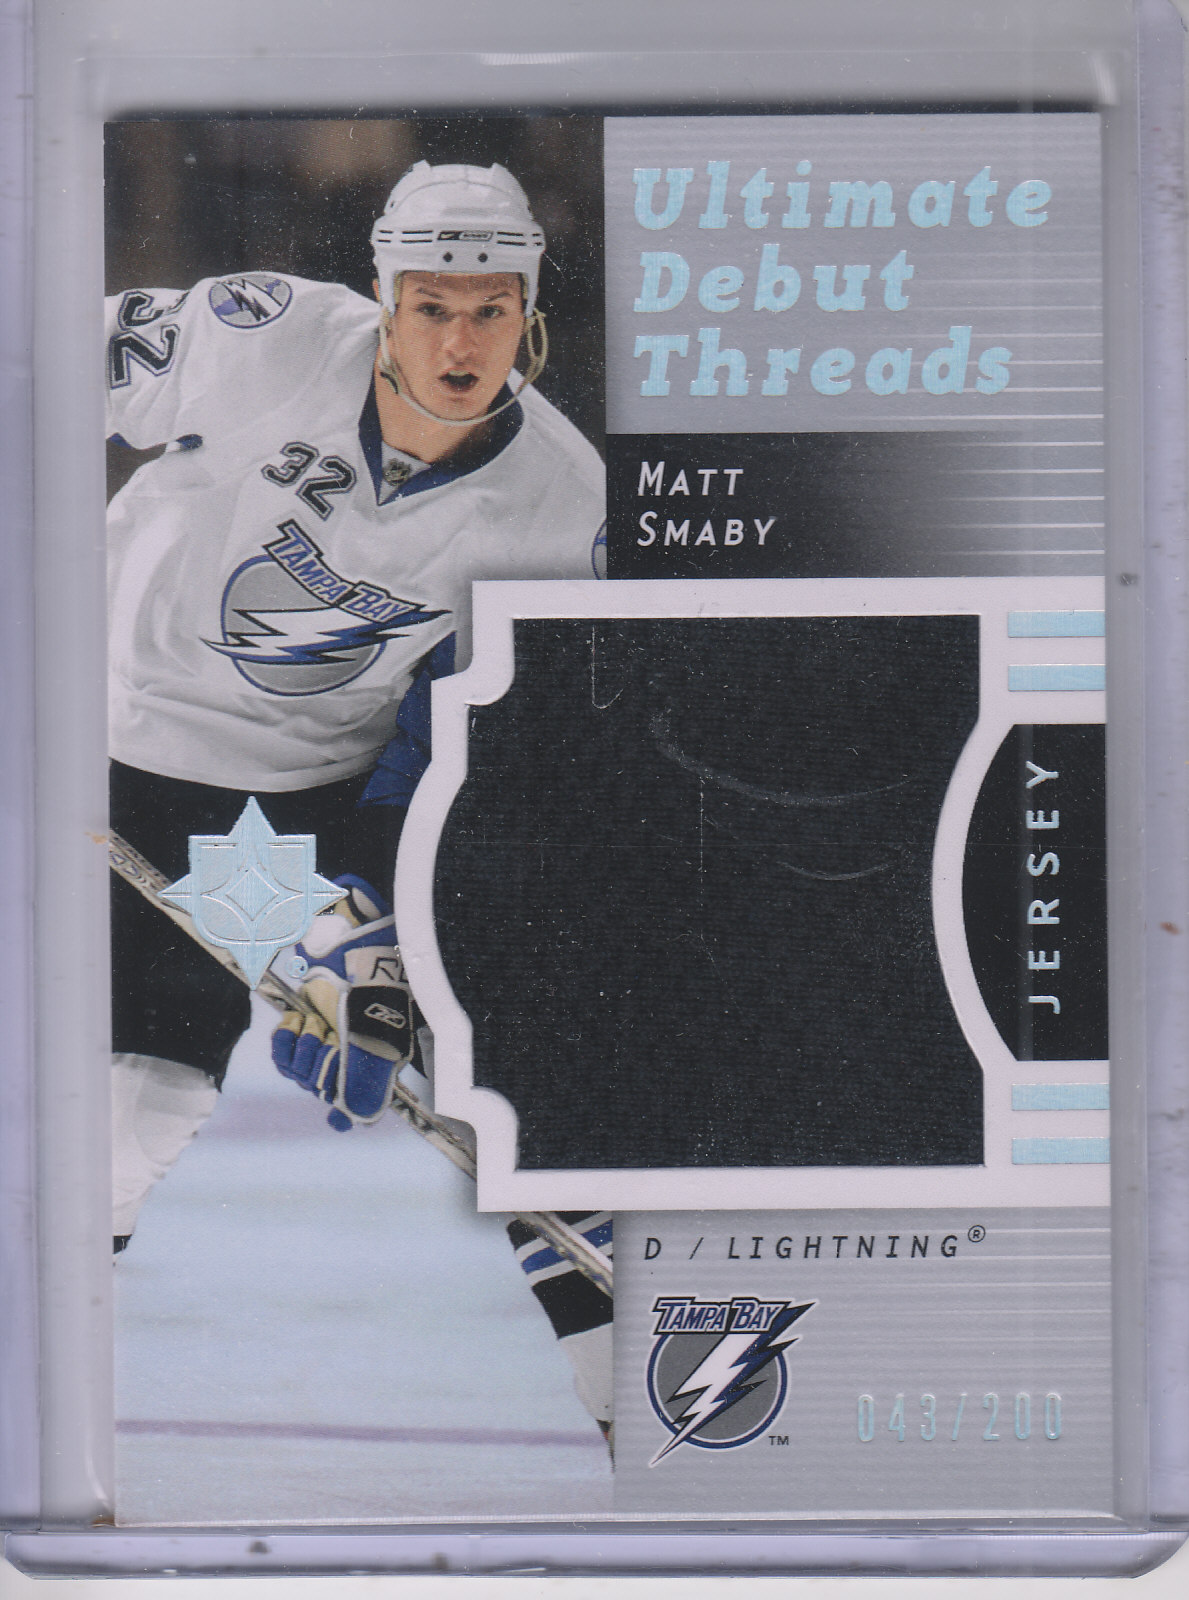 2007-08 Ultimate Collection Ultimate Debut Threads Jerseys #DTSM Matt Smaby